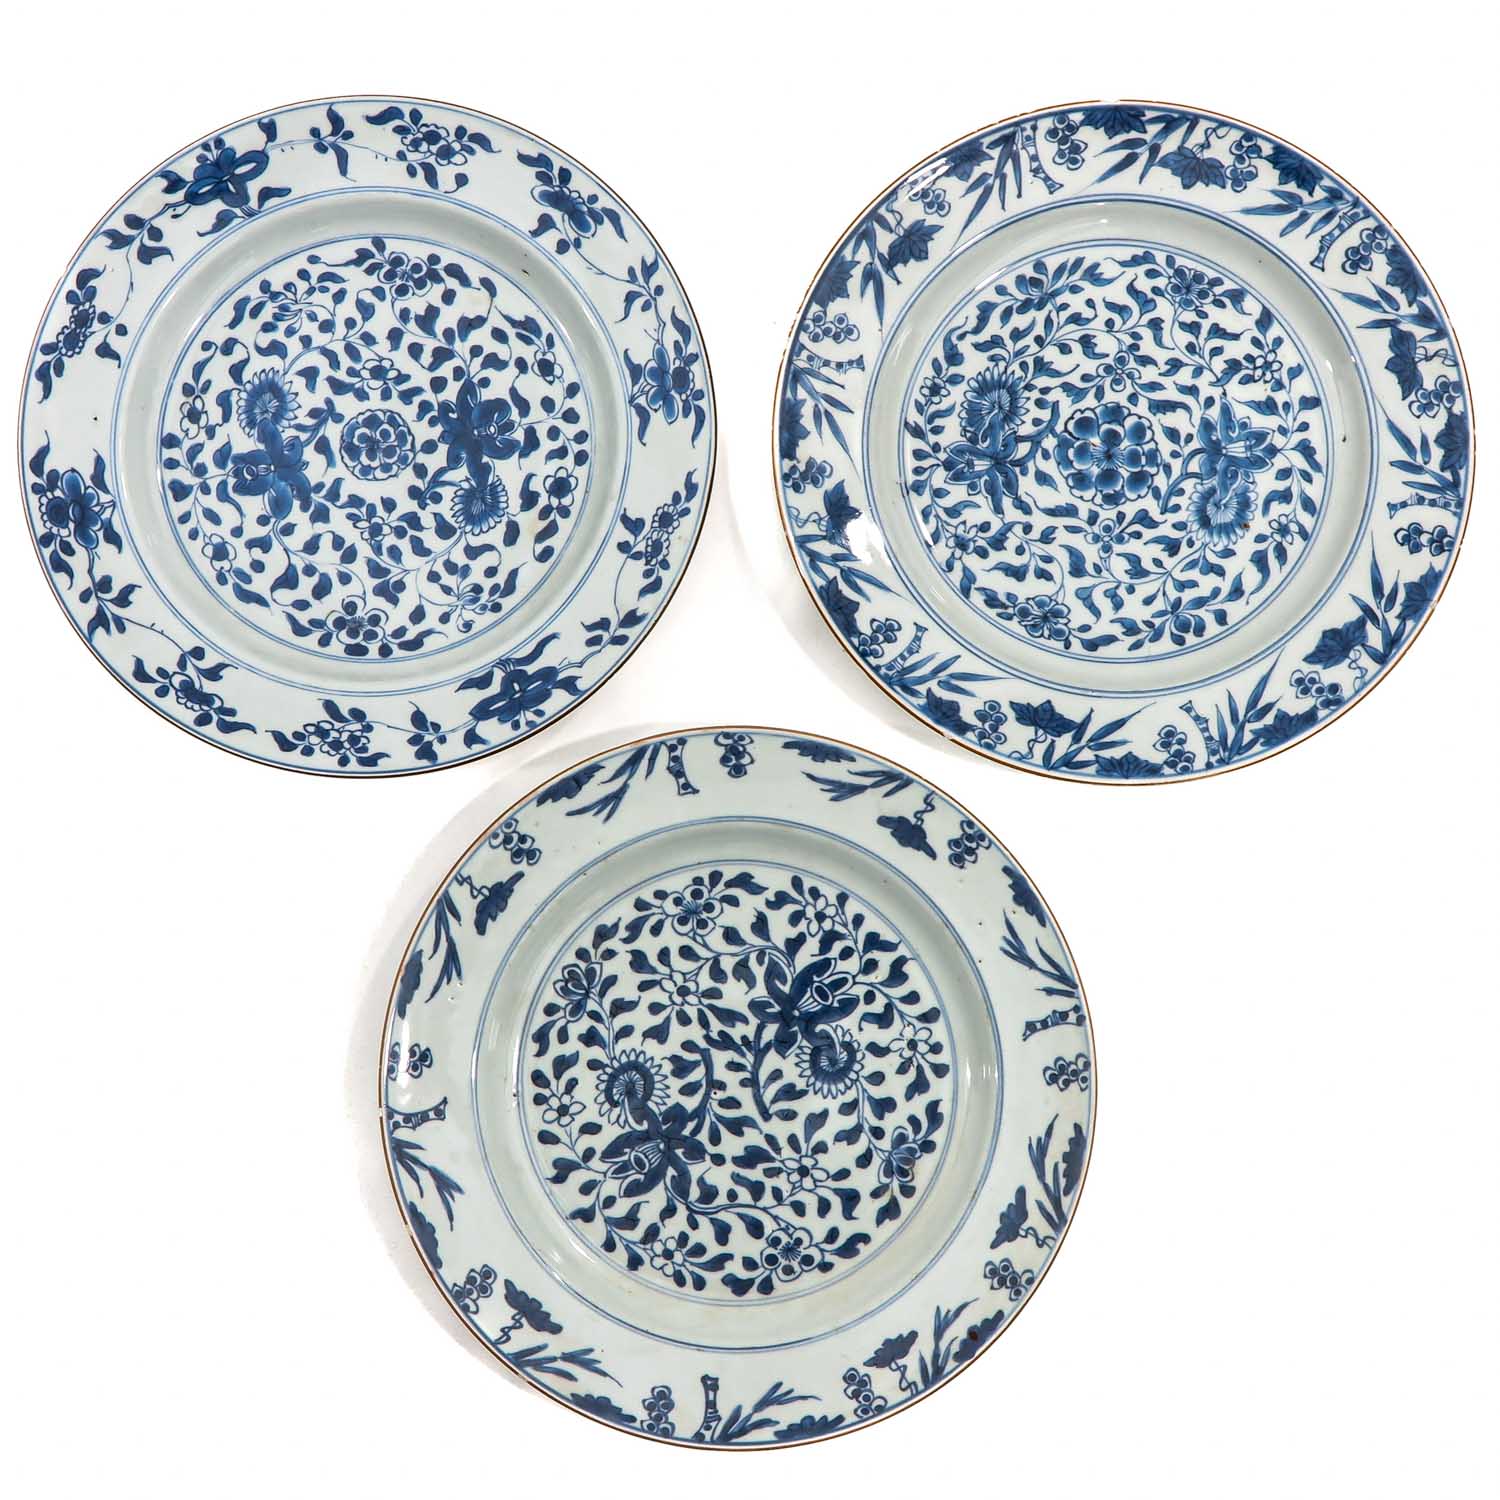 A Series of 9 Blue and White Plates - Image 5 of 10